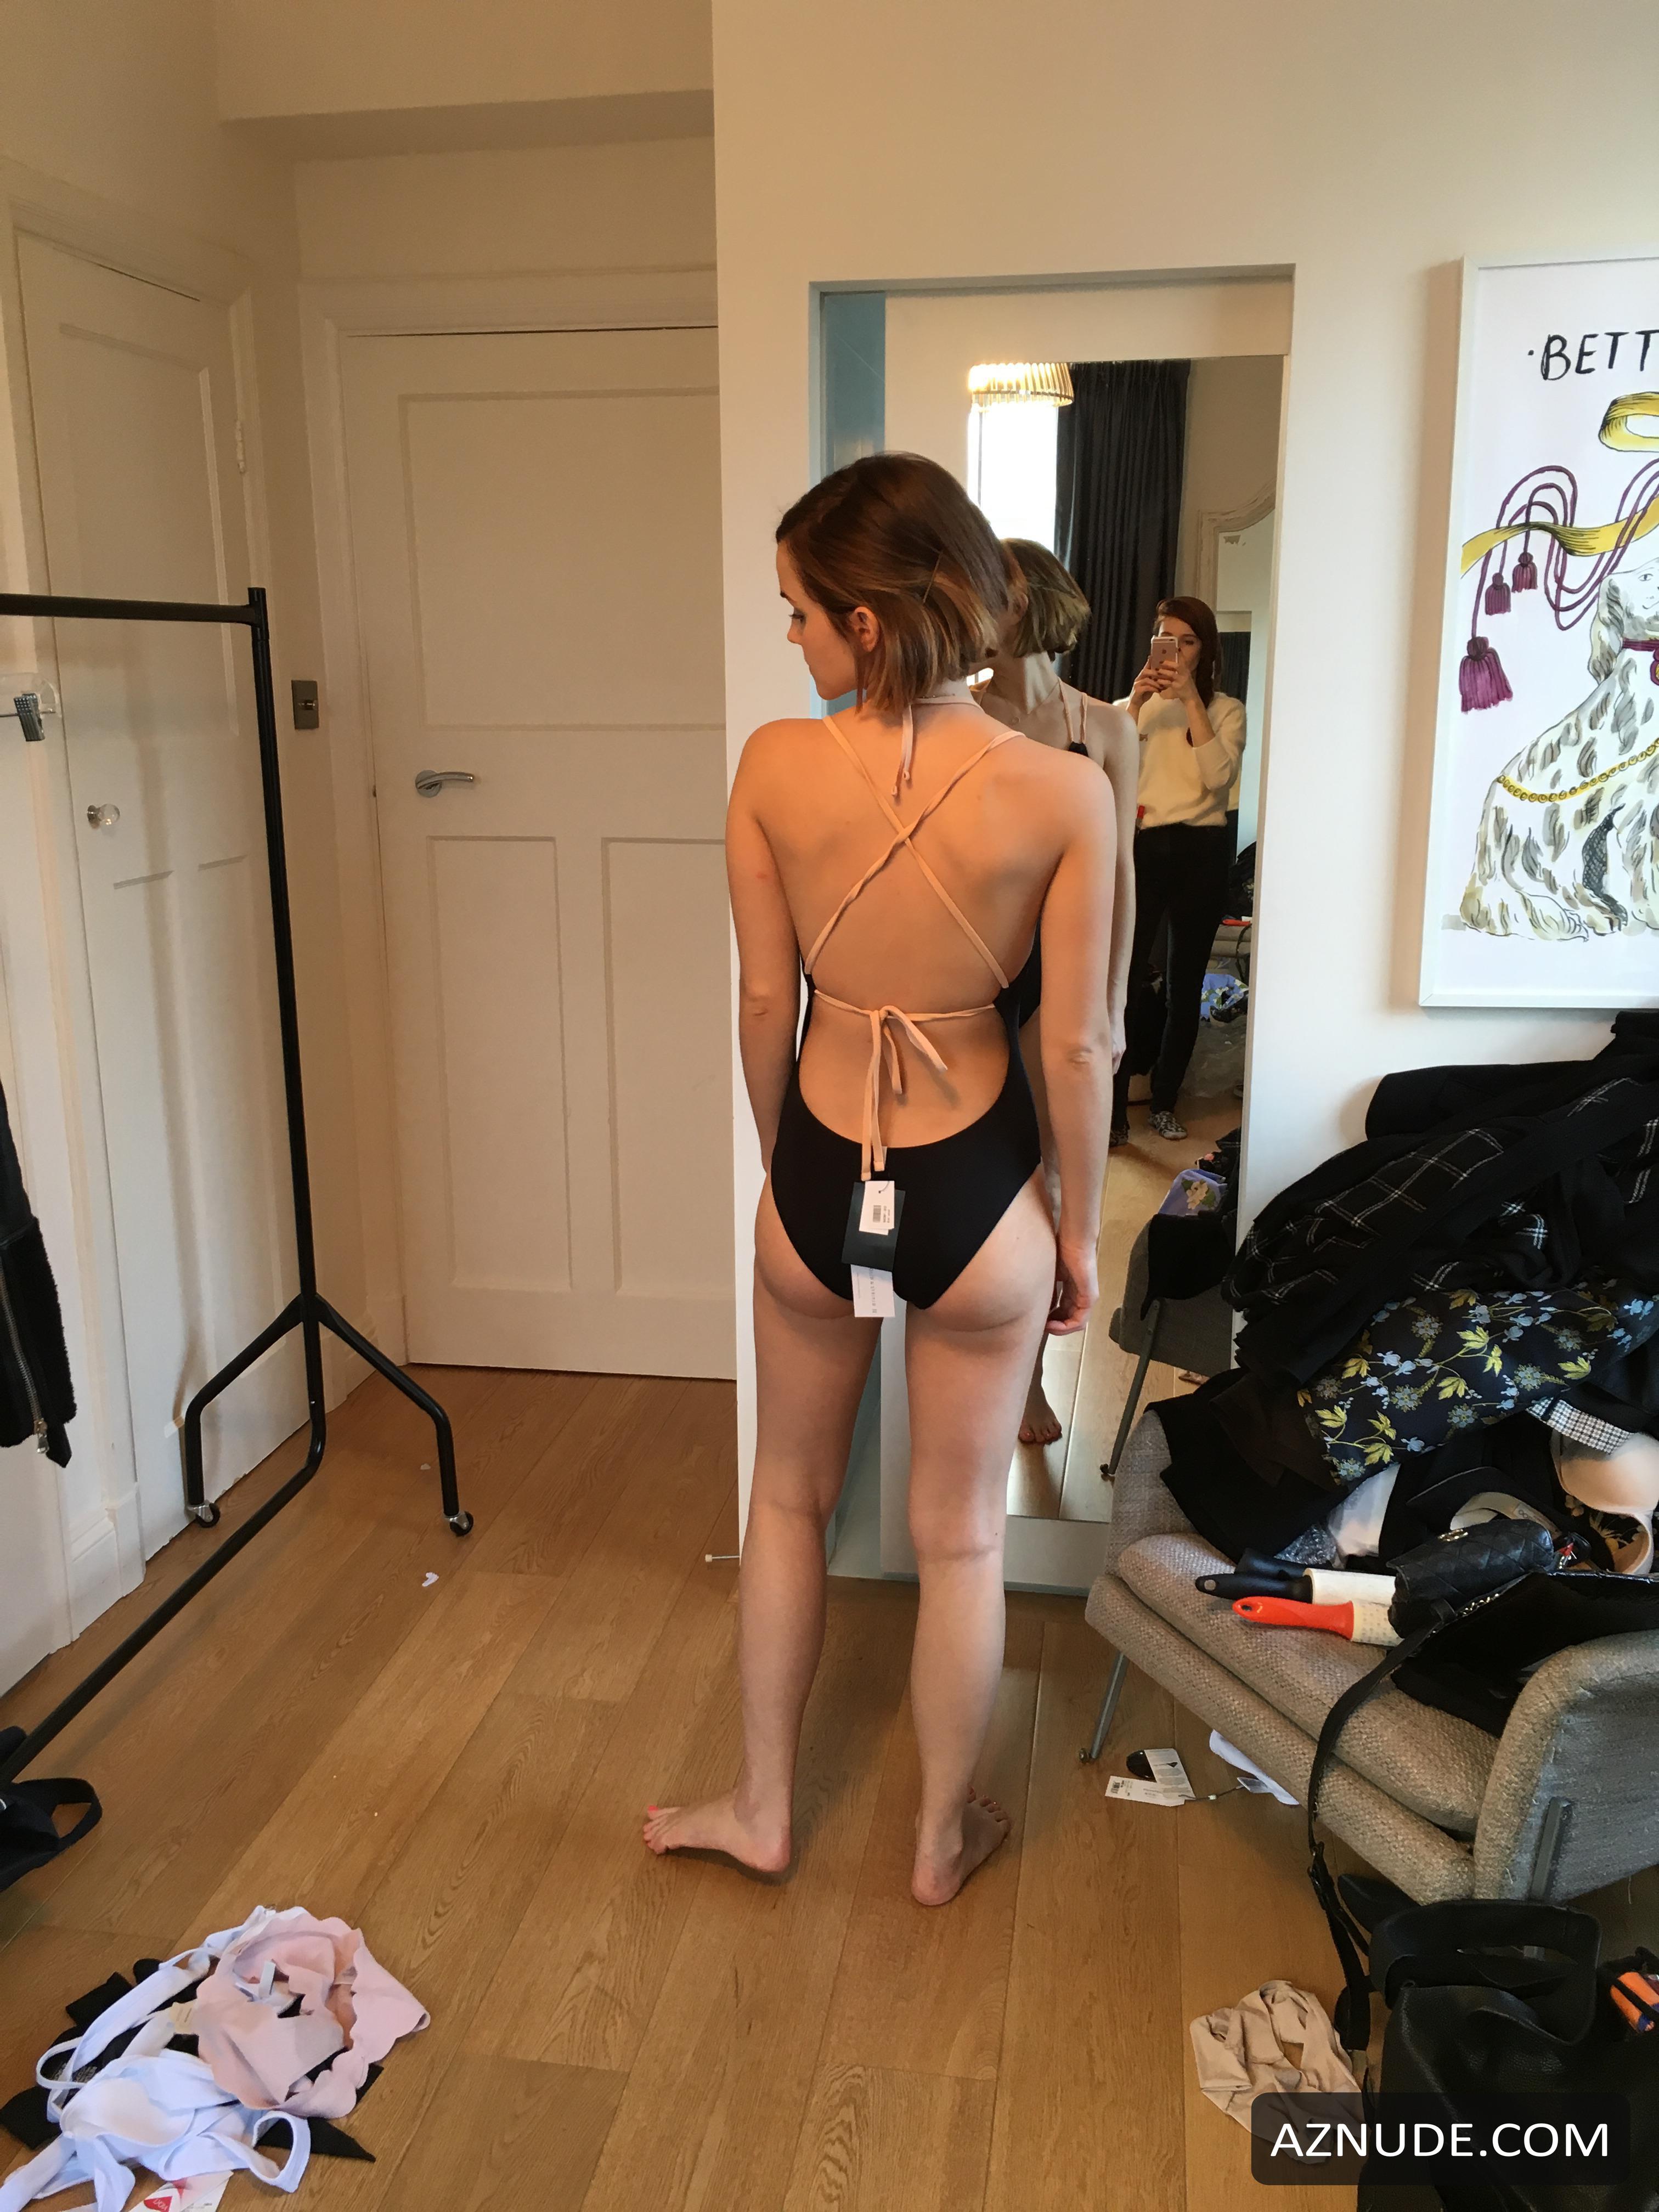 Emma Watson Trying On Clothes Aznude